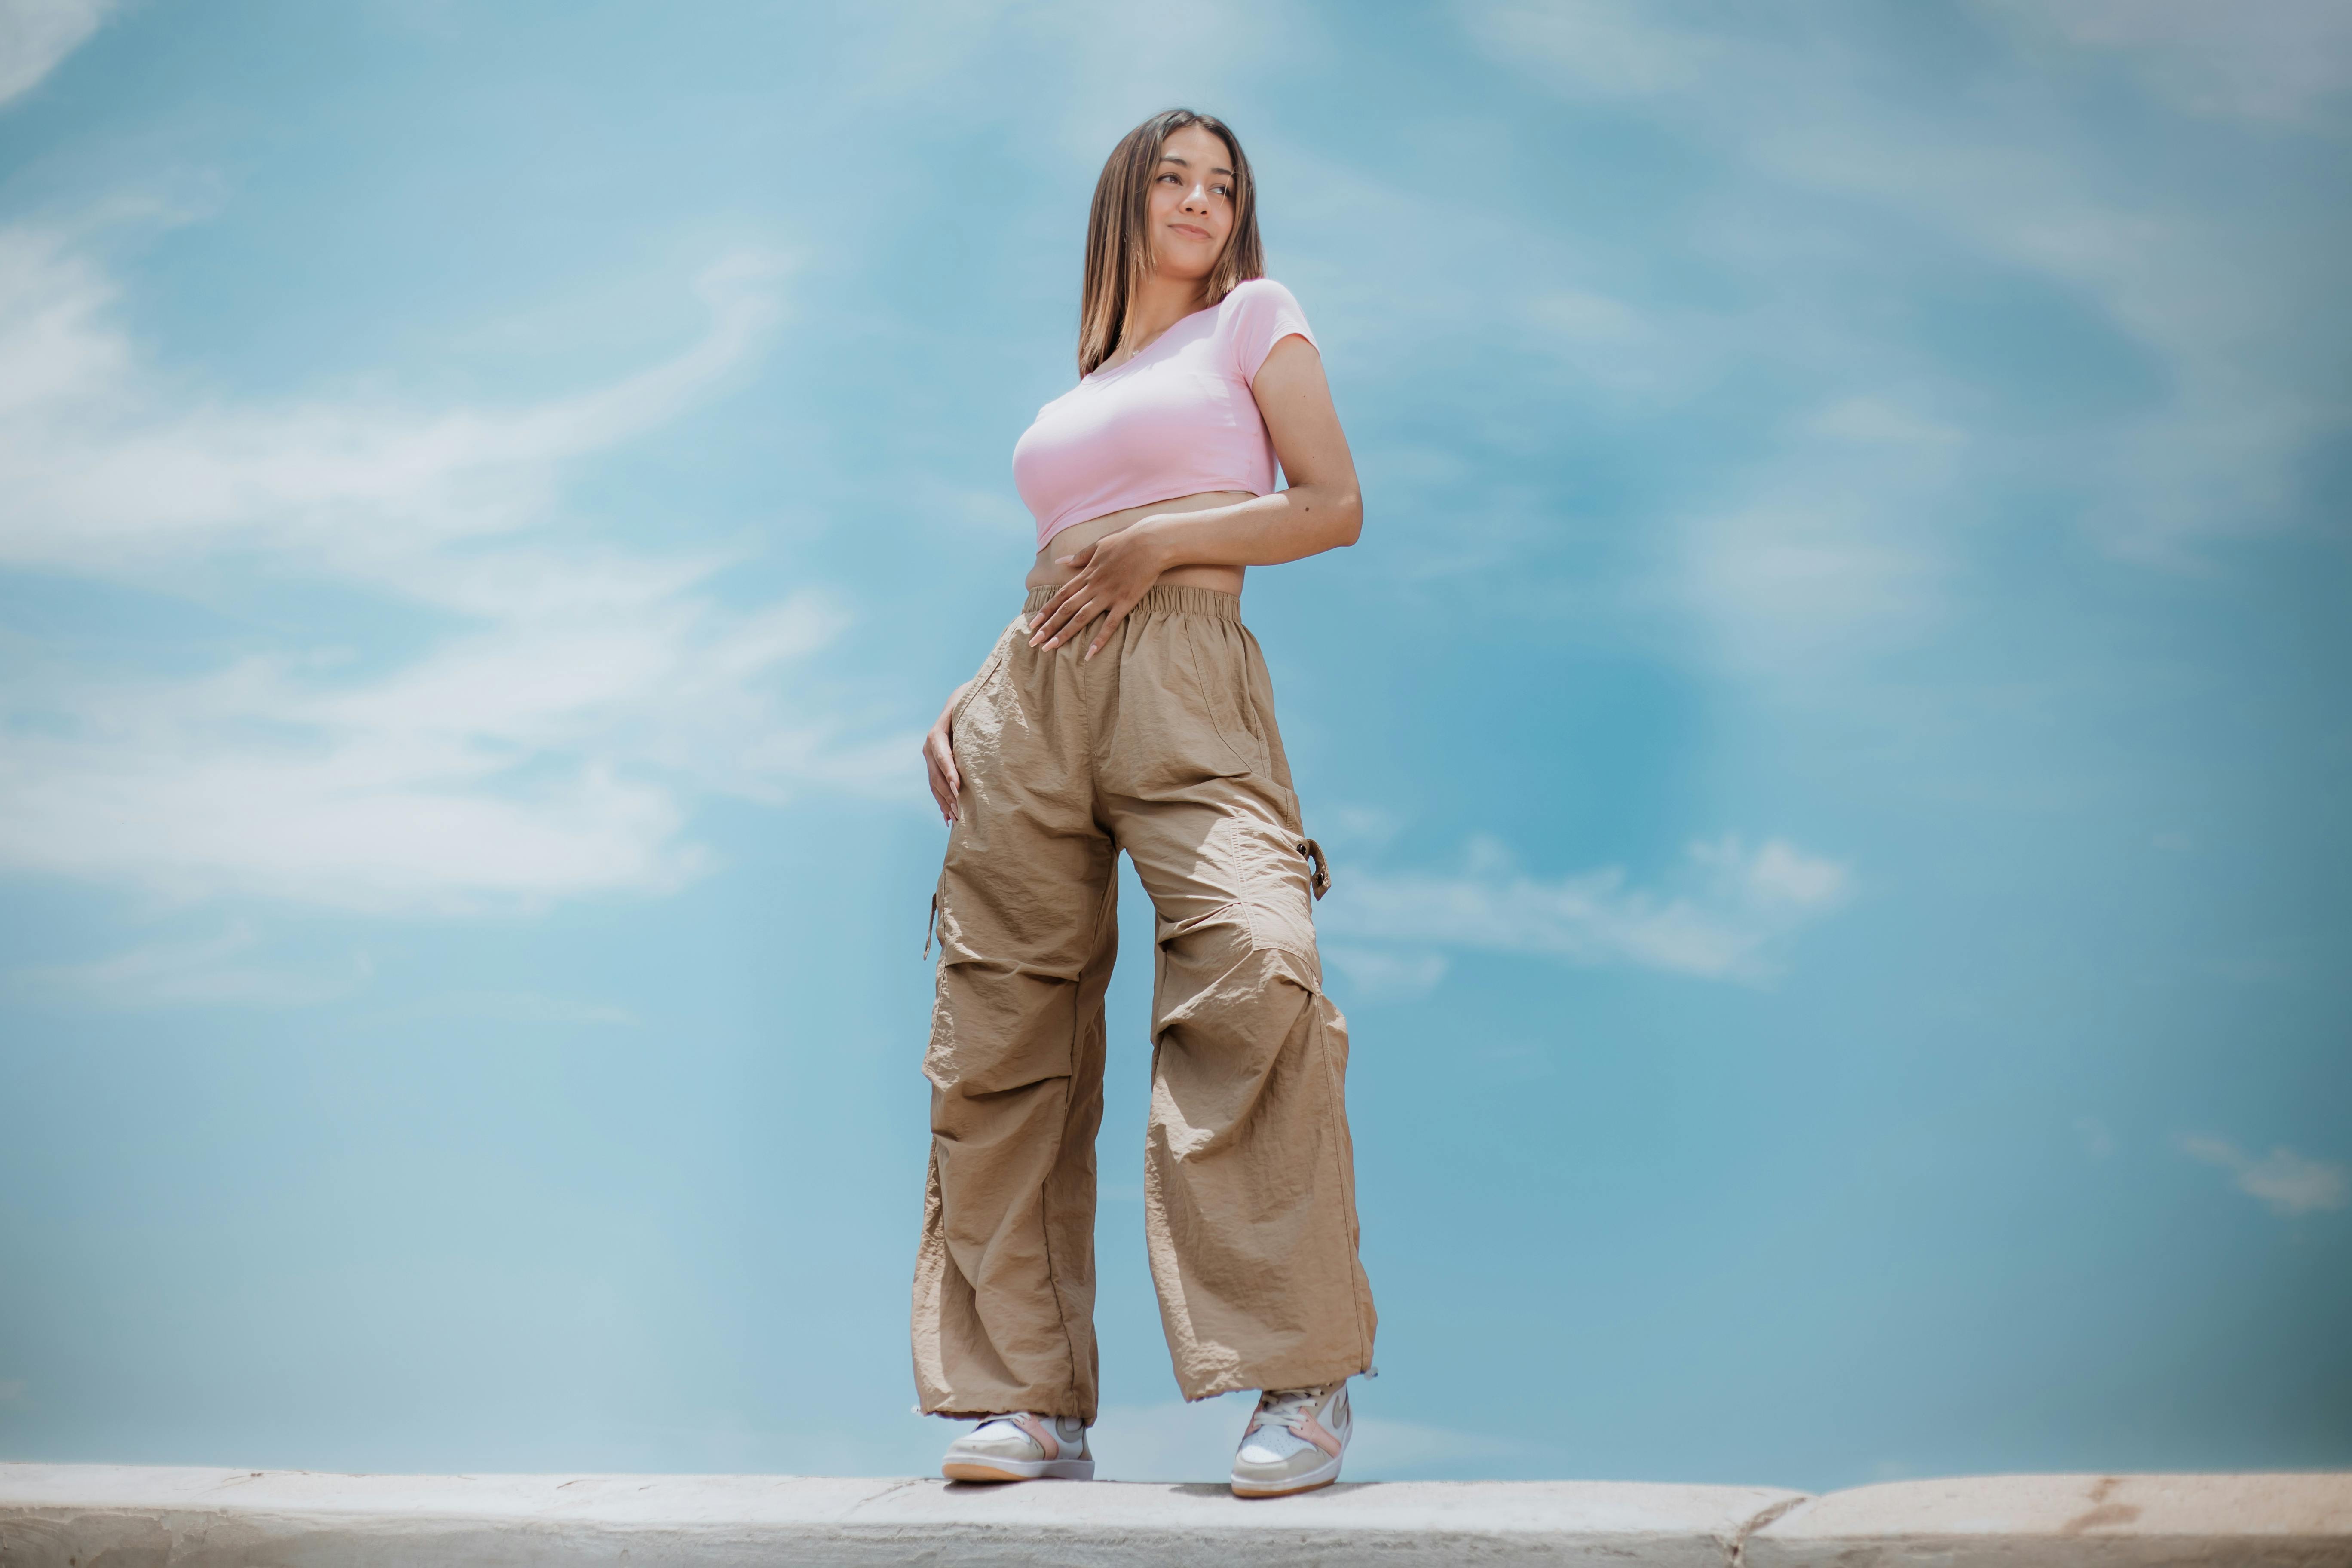 Woman in Beige Loose Pants and Pink T-Shirt · Free Stock Photo